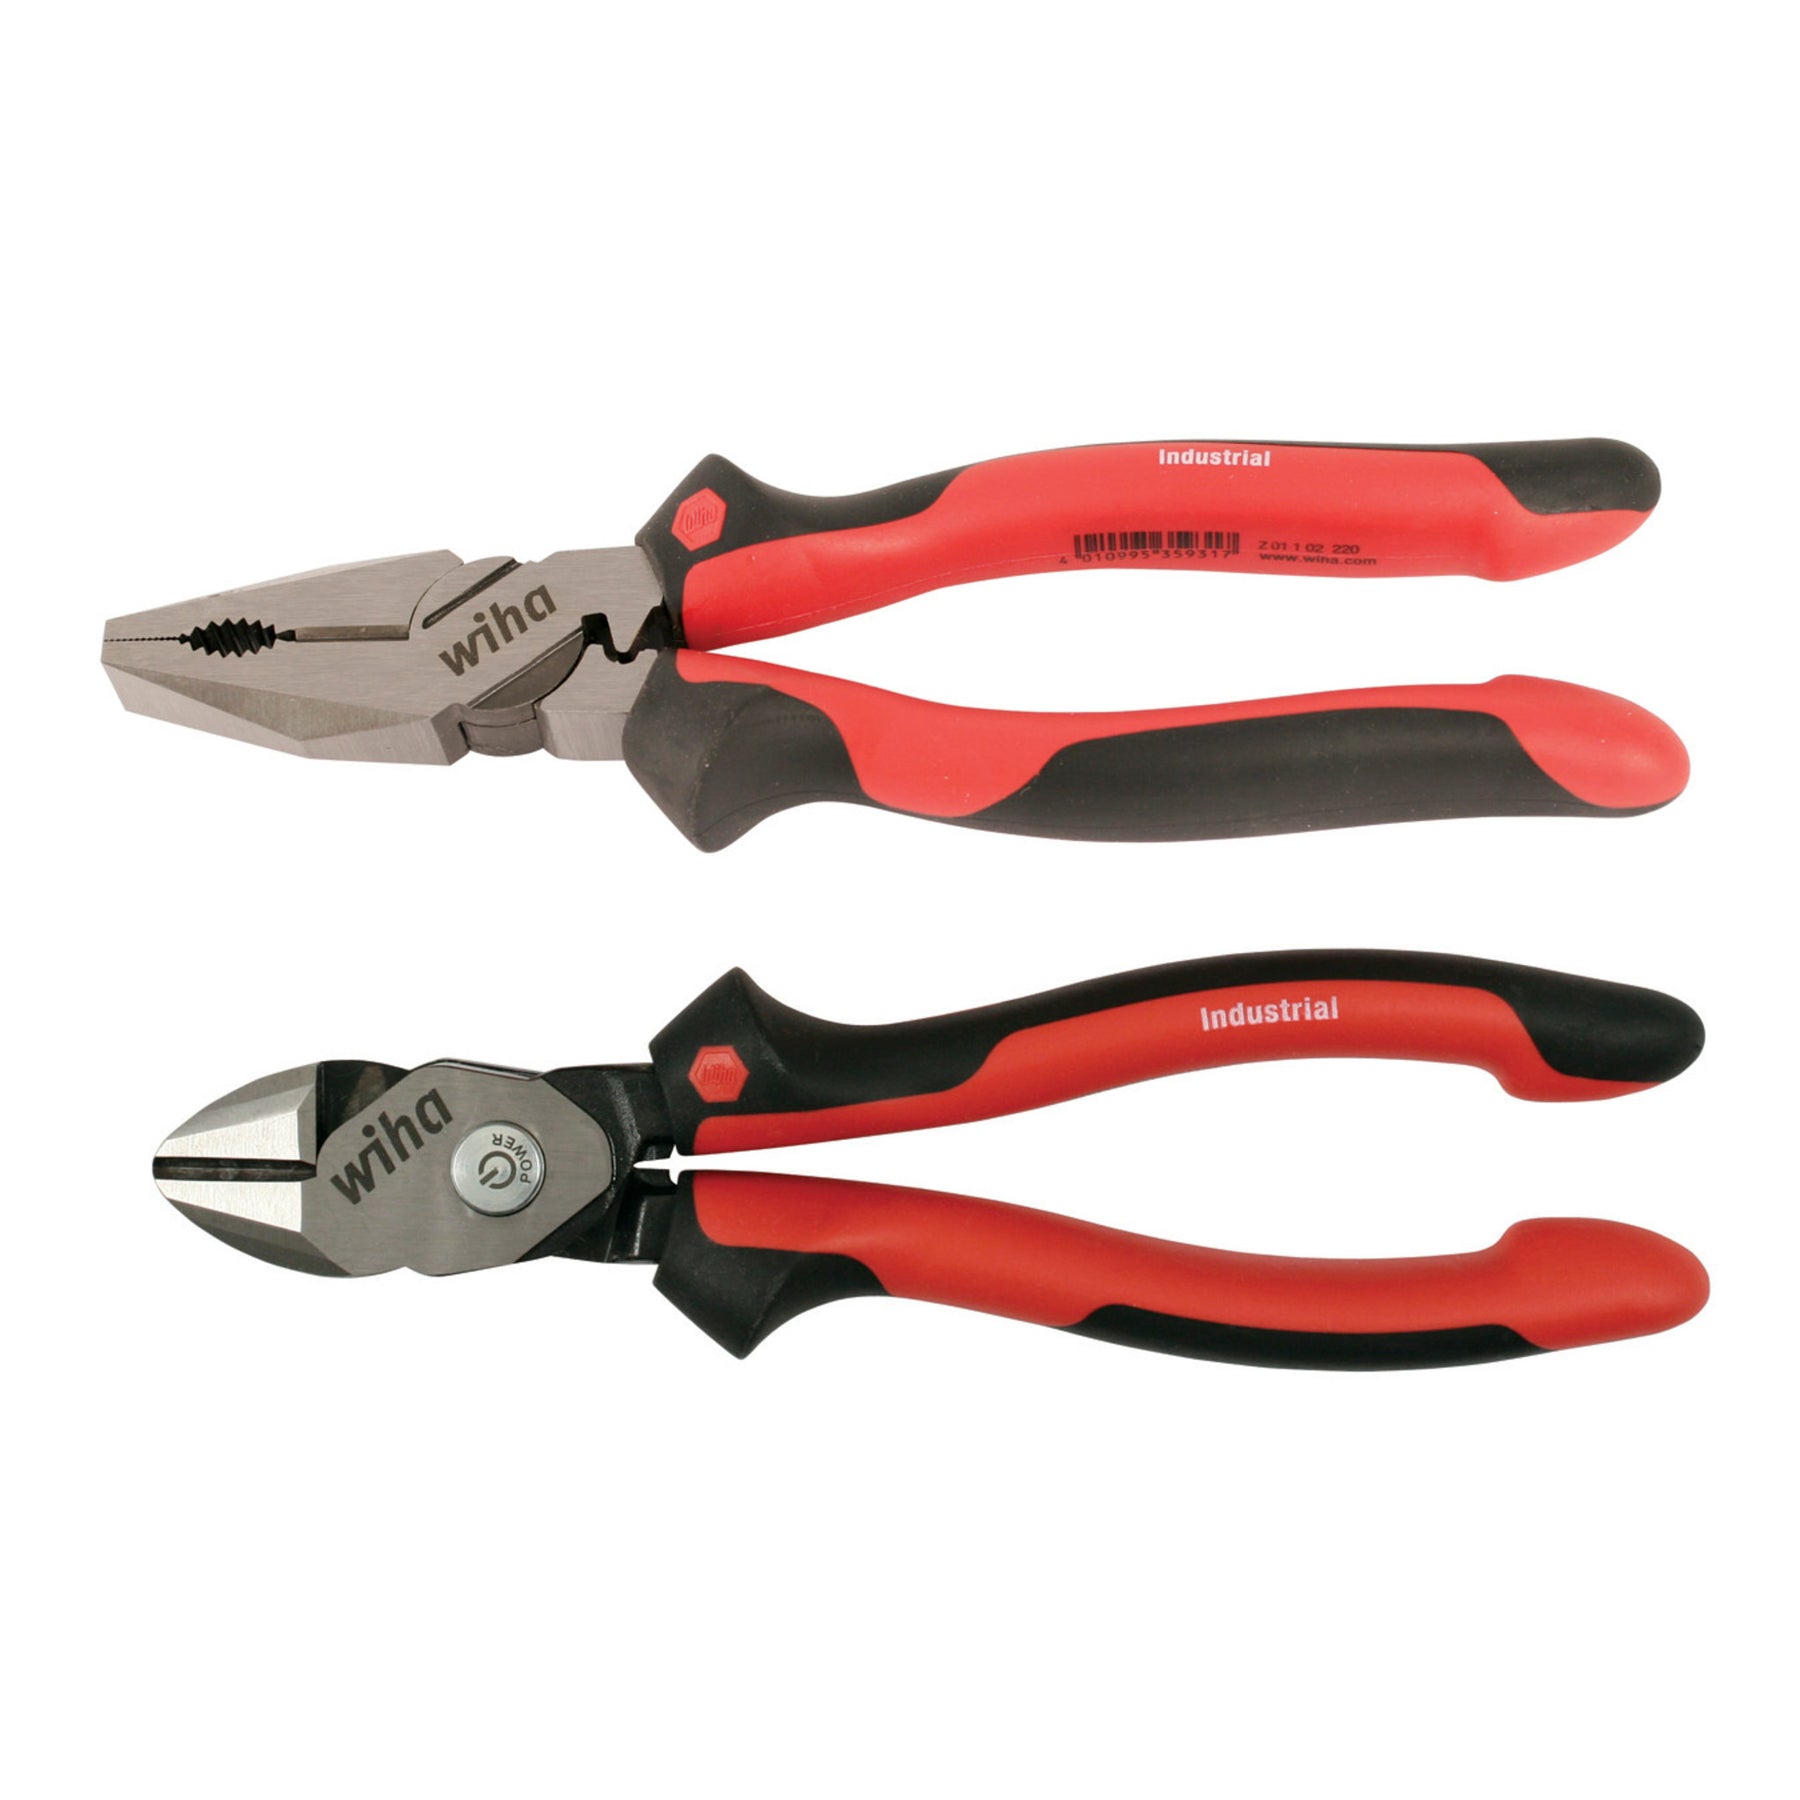 2 Piece Industrial SoftGrip Pliers and Cutters Set